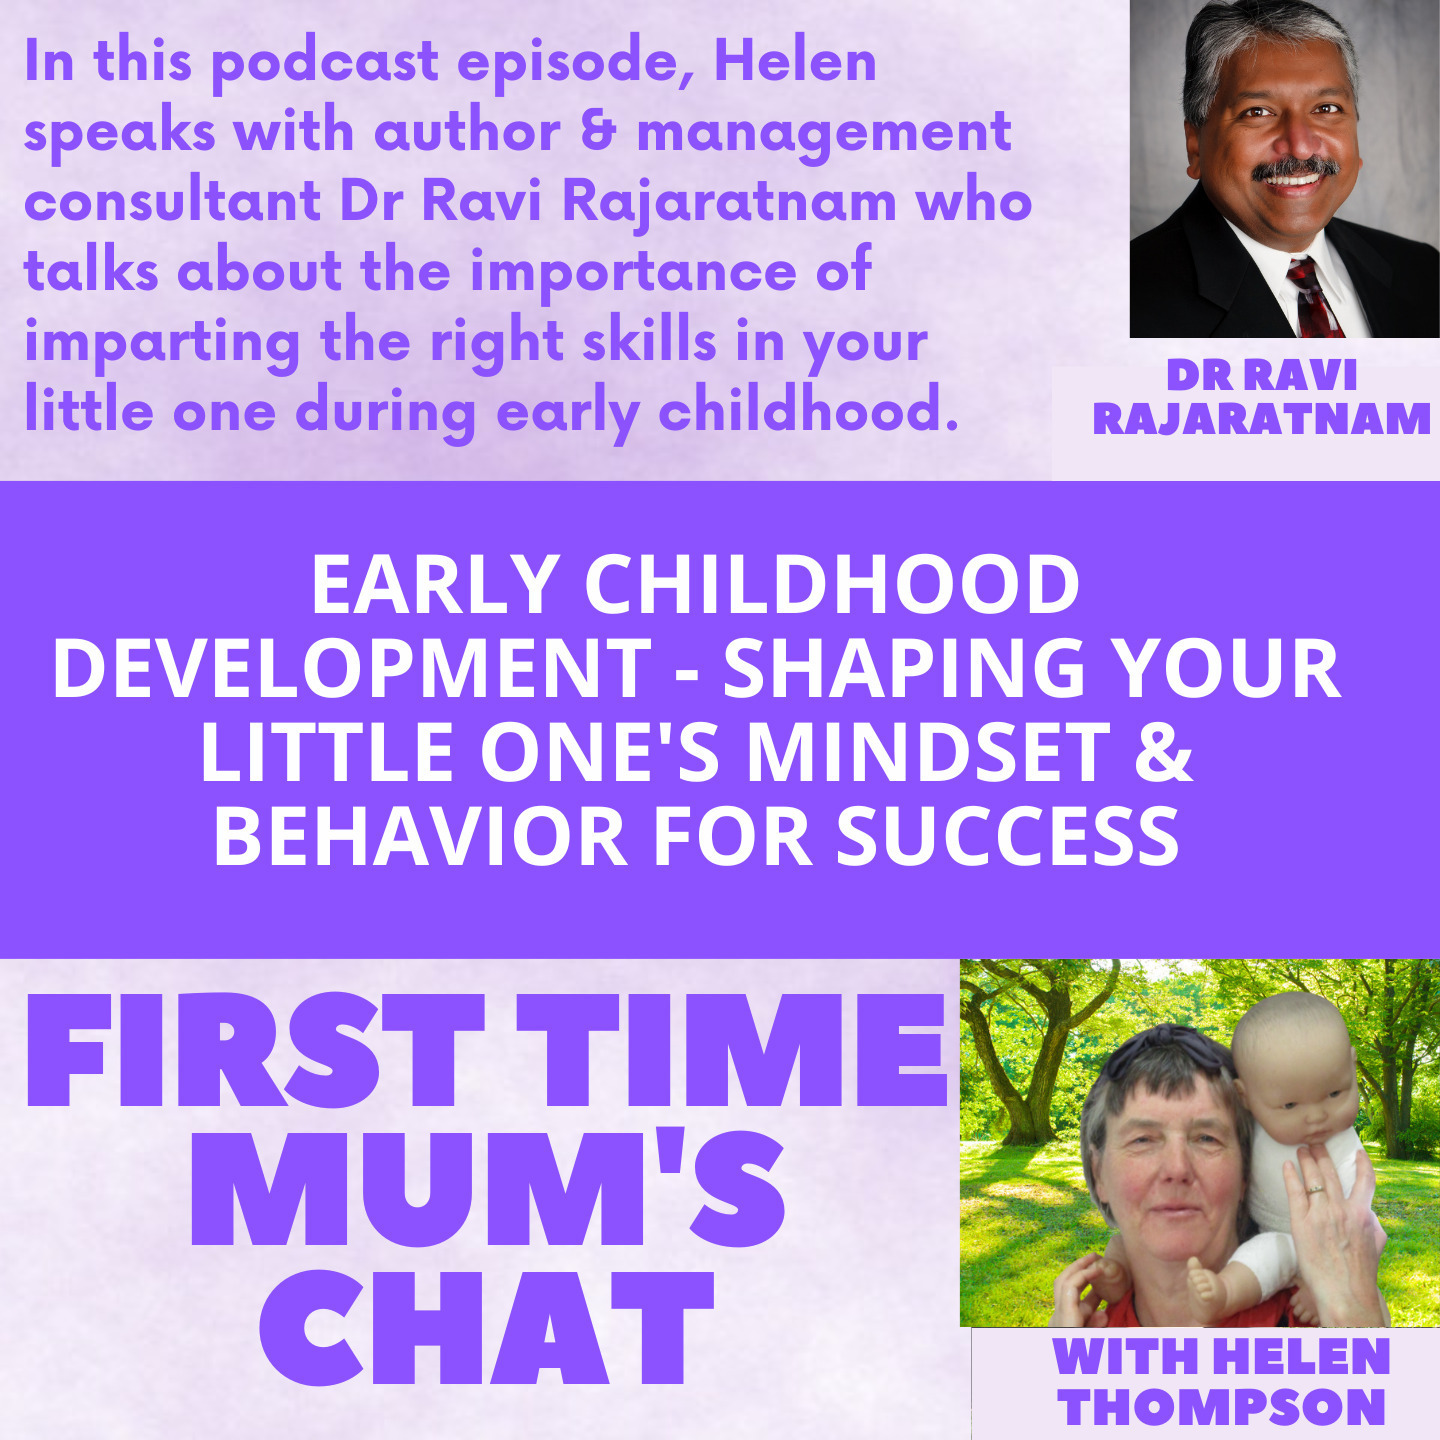 Early Childhood Development - Shaping Your Little One's Mindset & Behavior For Success